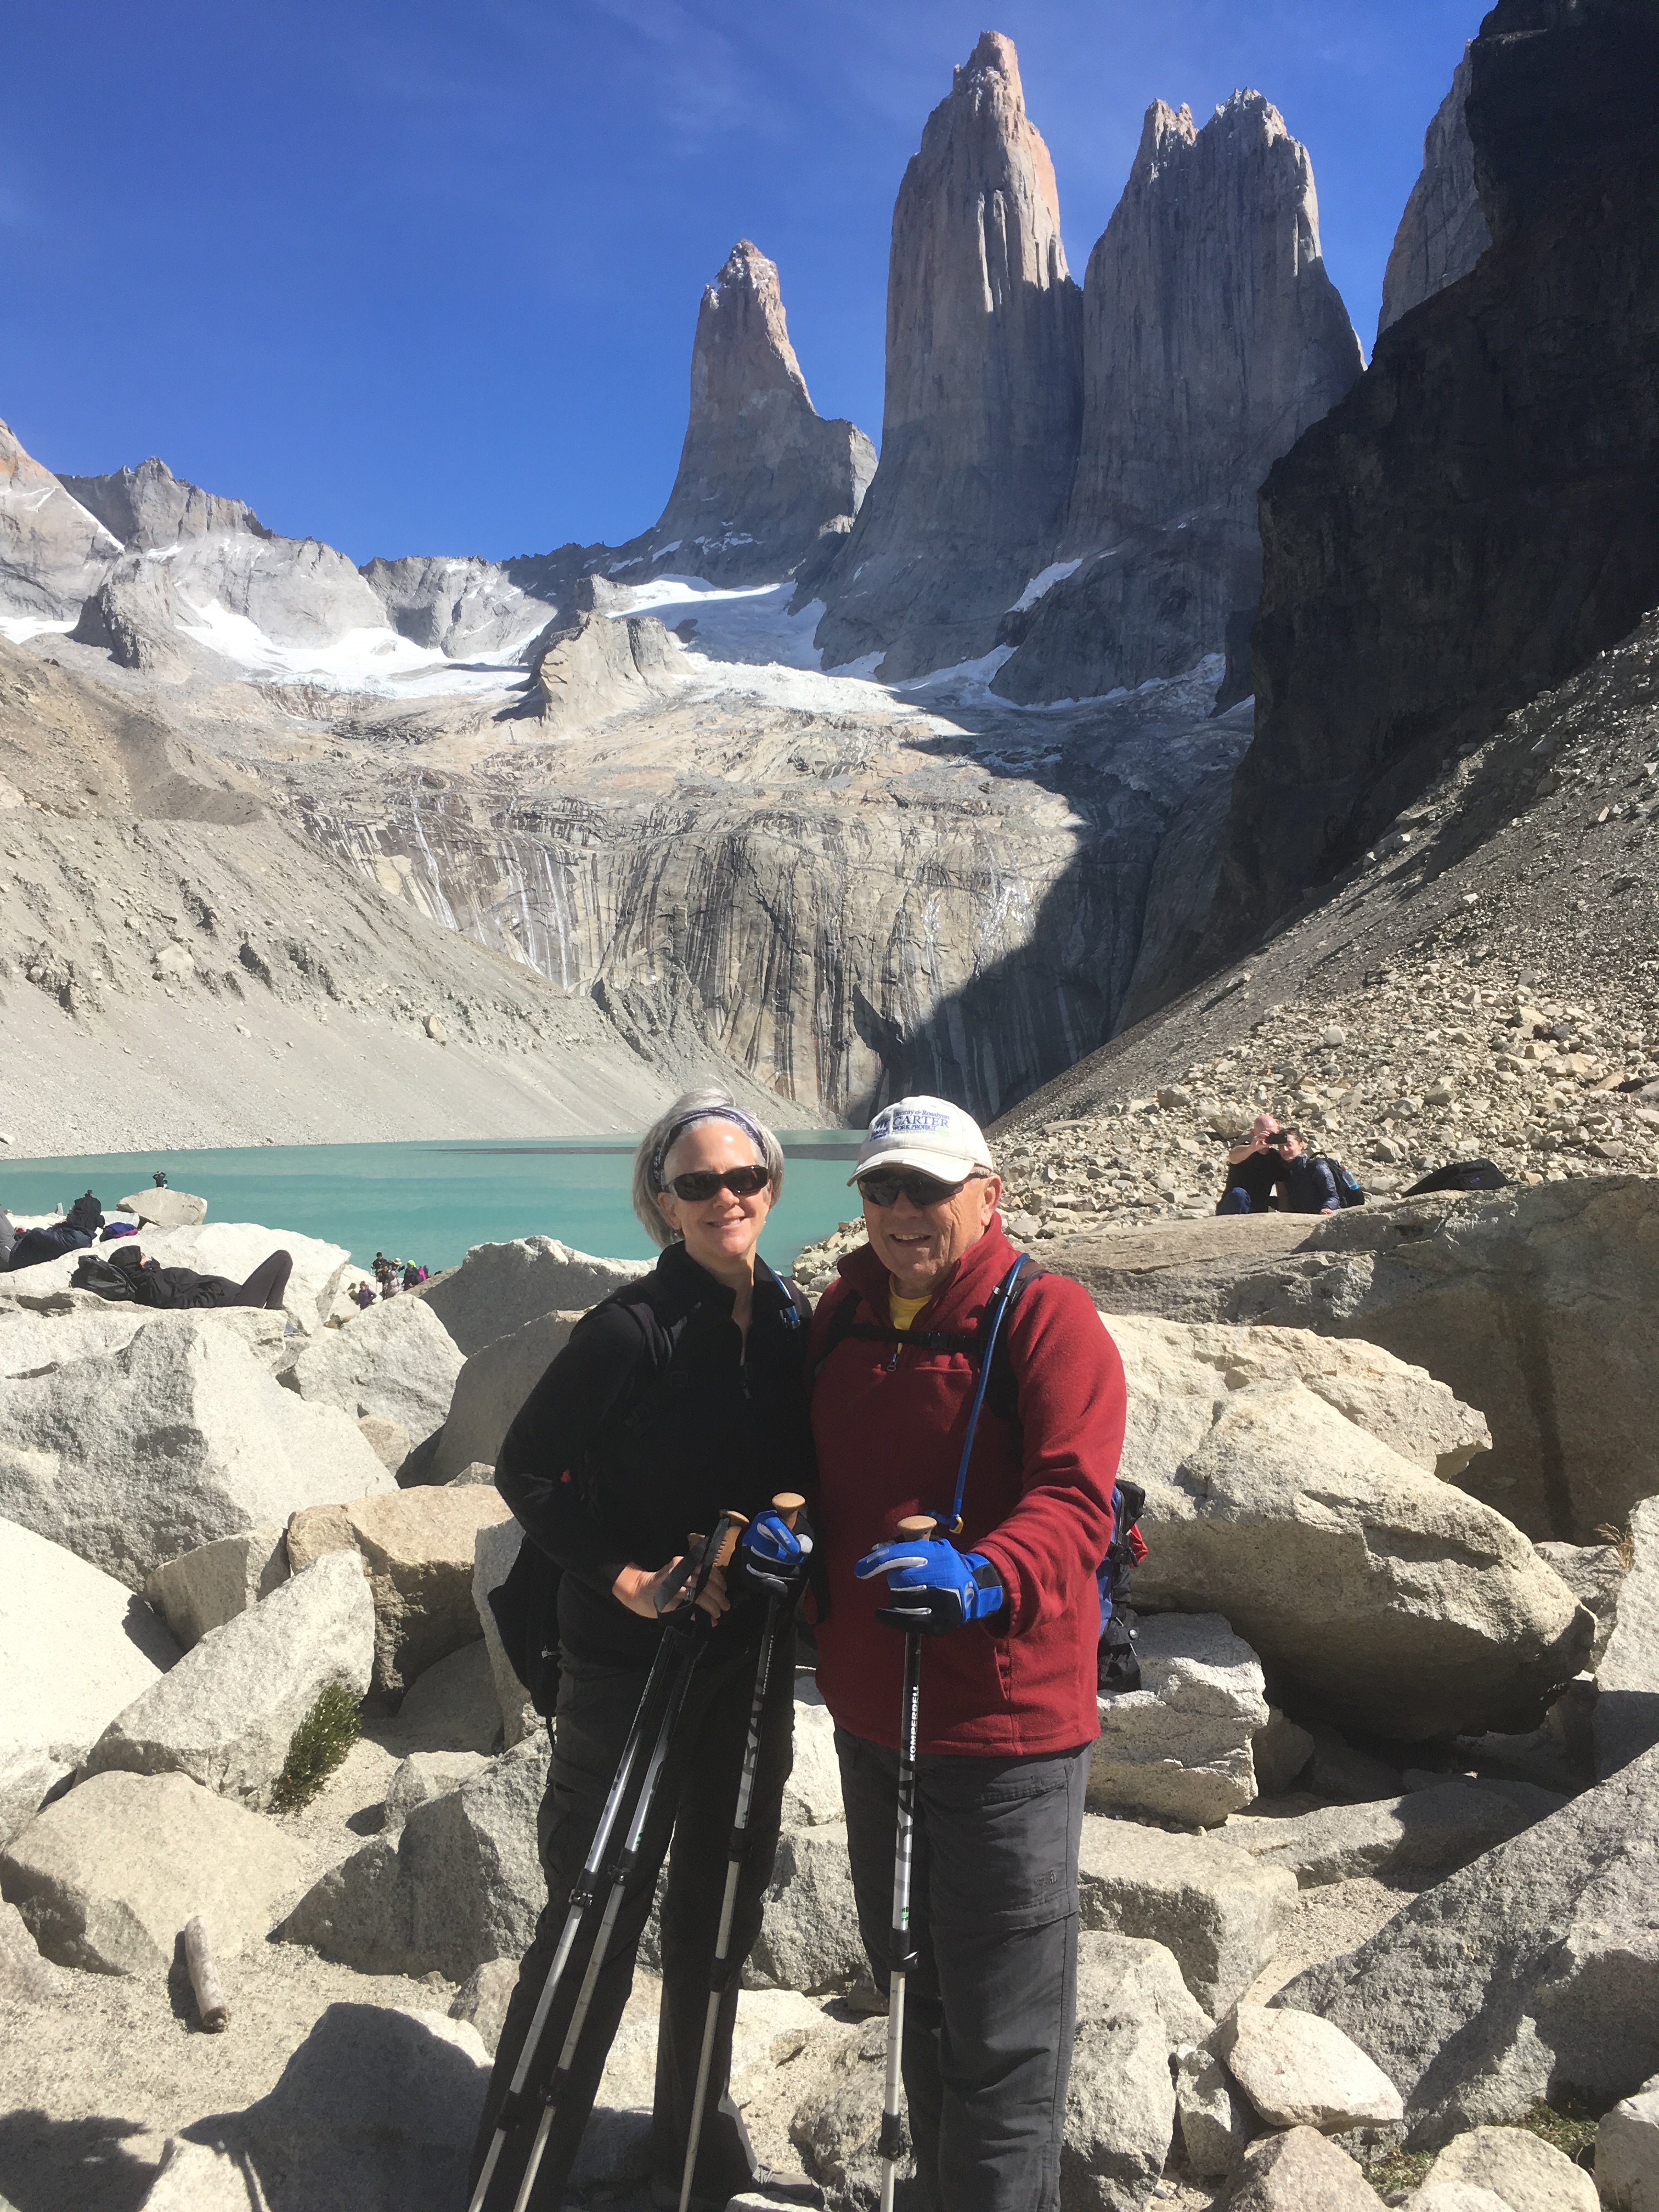 February 2017--at the base of the Torres del Paine, Torres del Paine National Park, Chile